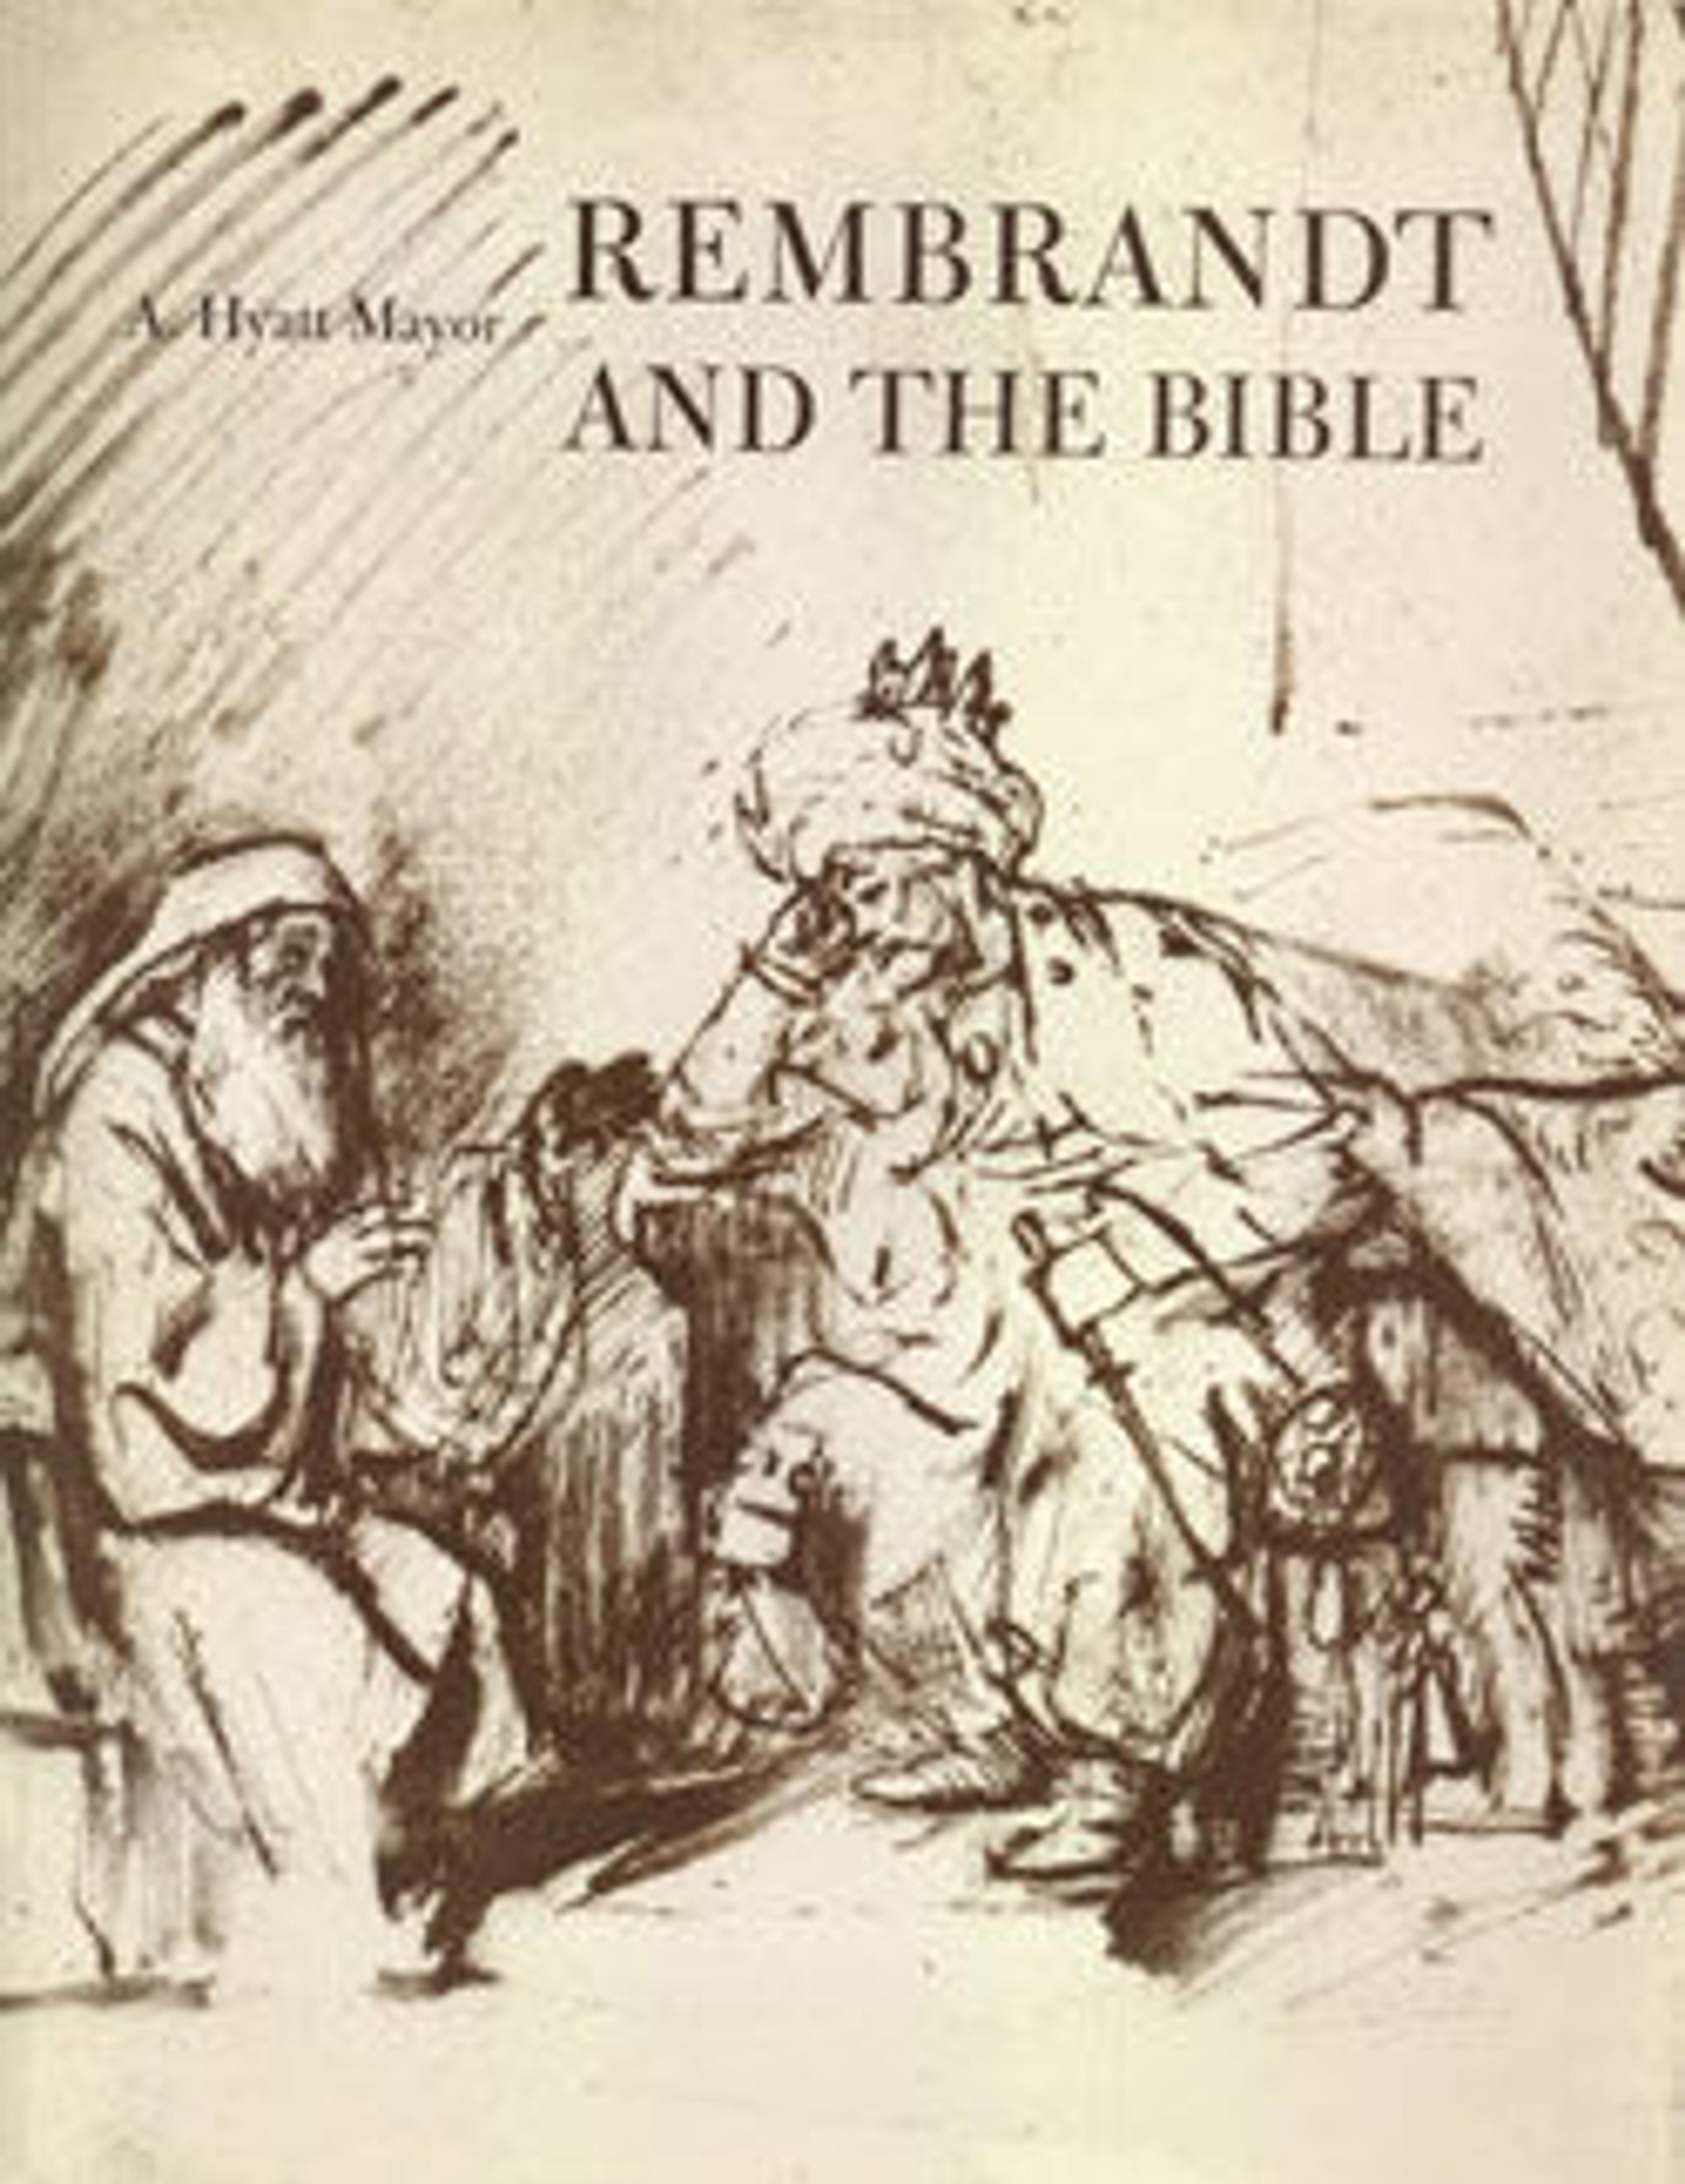 Rembrandt and the Bible